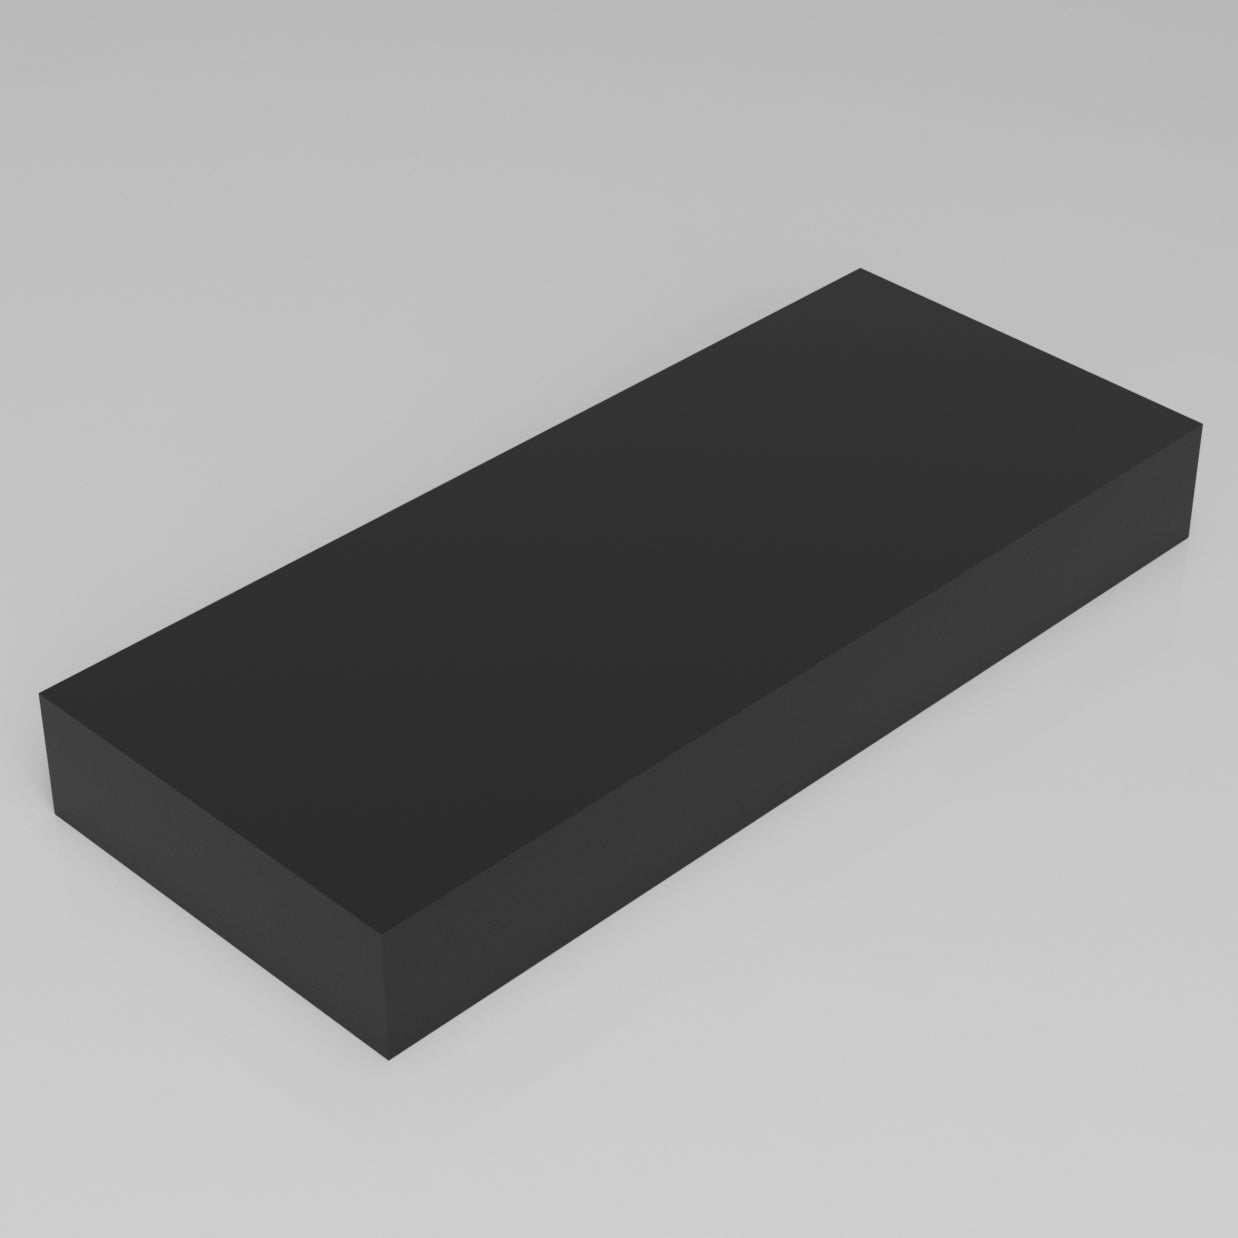 Machinable Wax Rectangular Block Front View 3 Inch by 10 Inch by 24 Inch